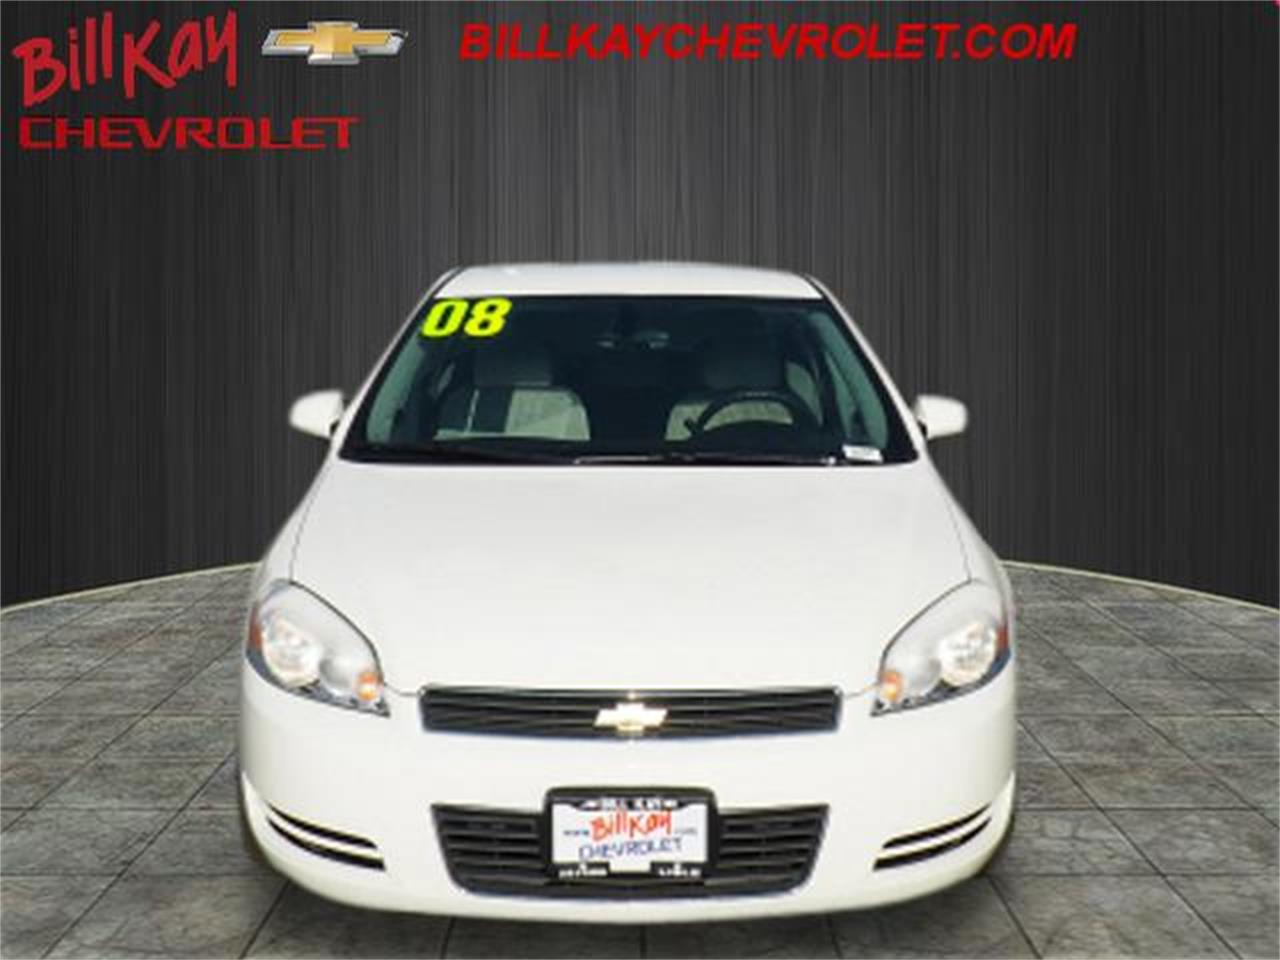 2008 Chevrolet Impala for sale in Downers Grove, IL